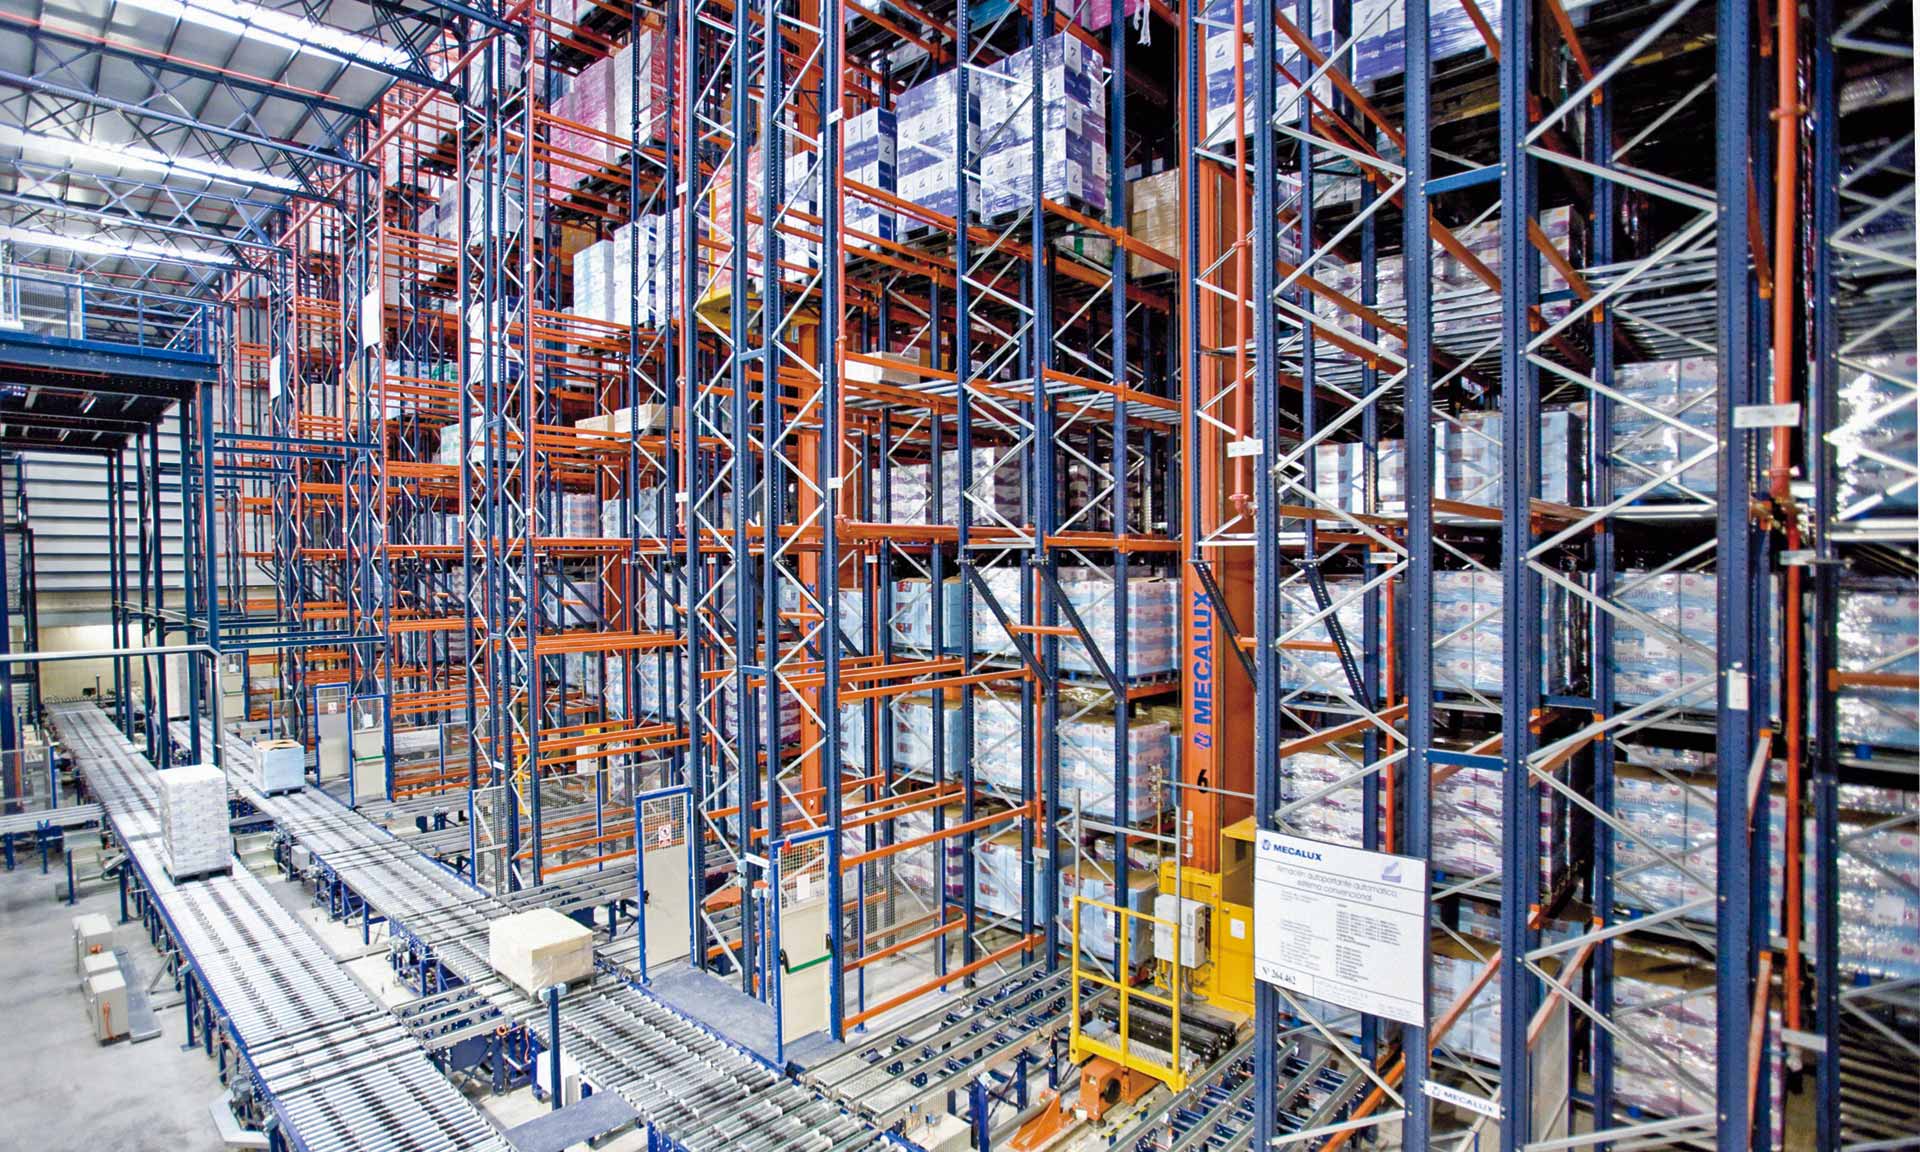 A fully automated warehouse is a logistics facility in which human intervention is minimal